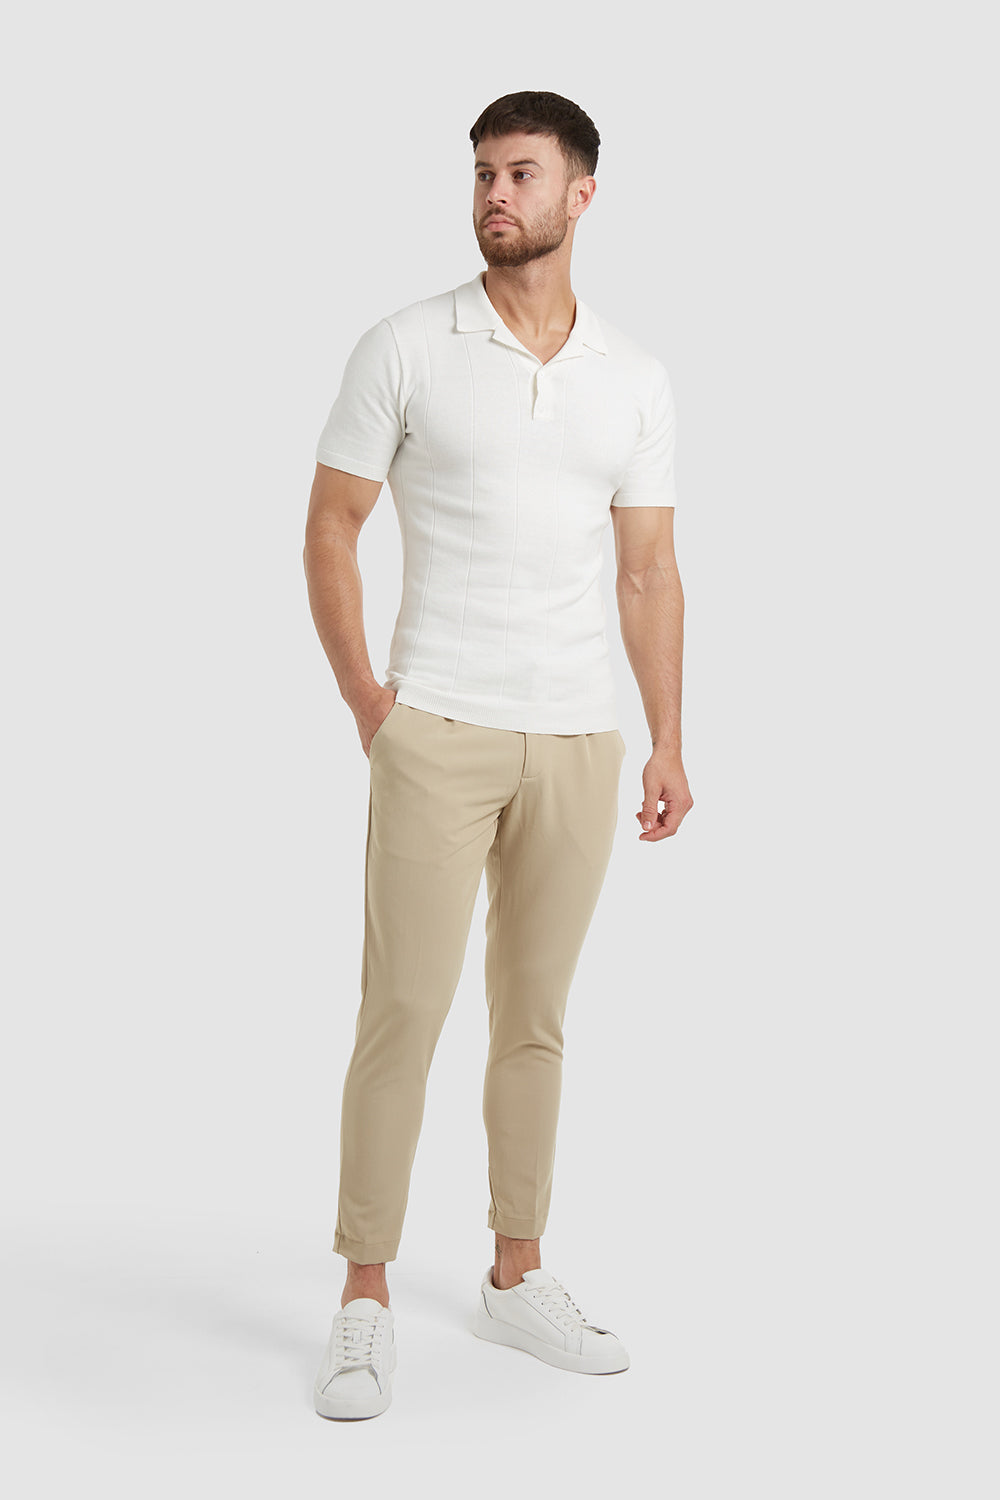 Ribbed Open Collar Knitted Polo in Chalk - TAILORED ATHLETE - ROW